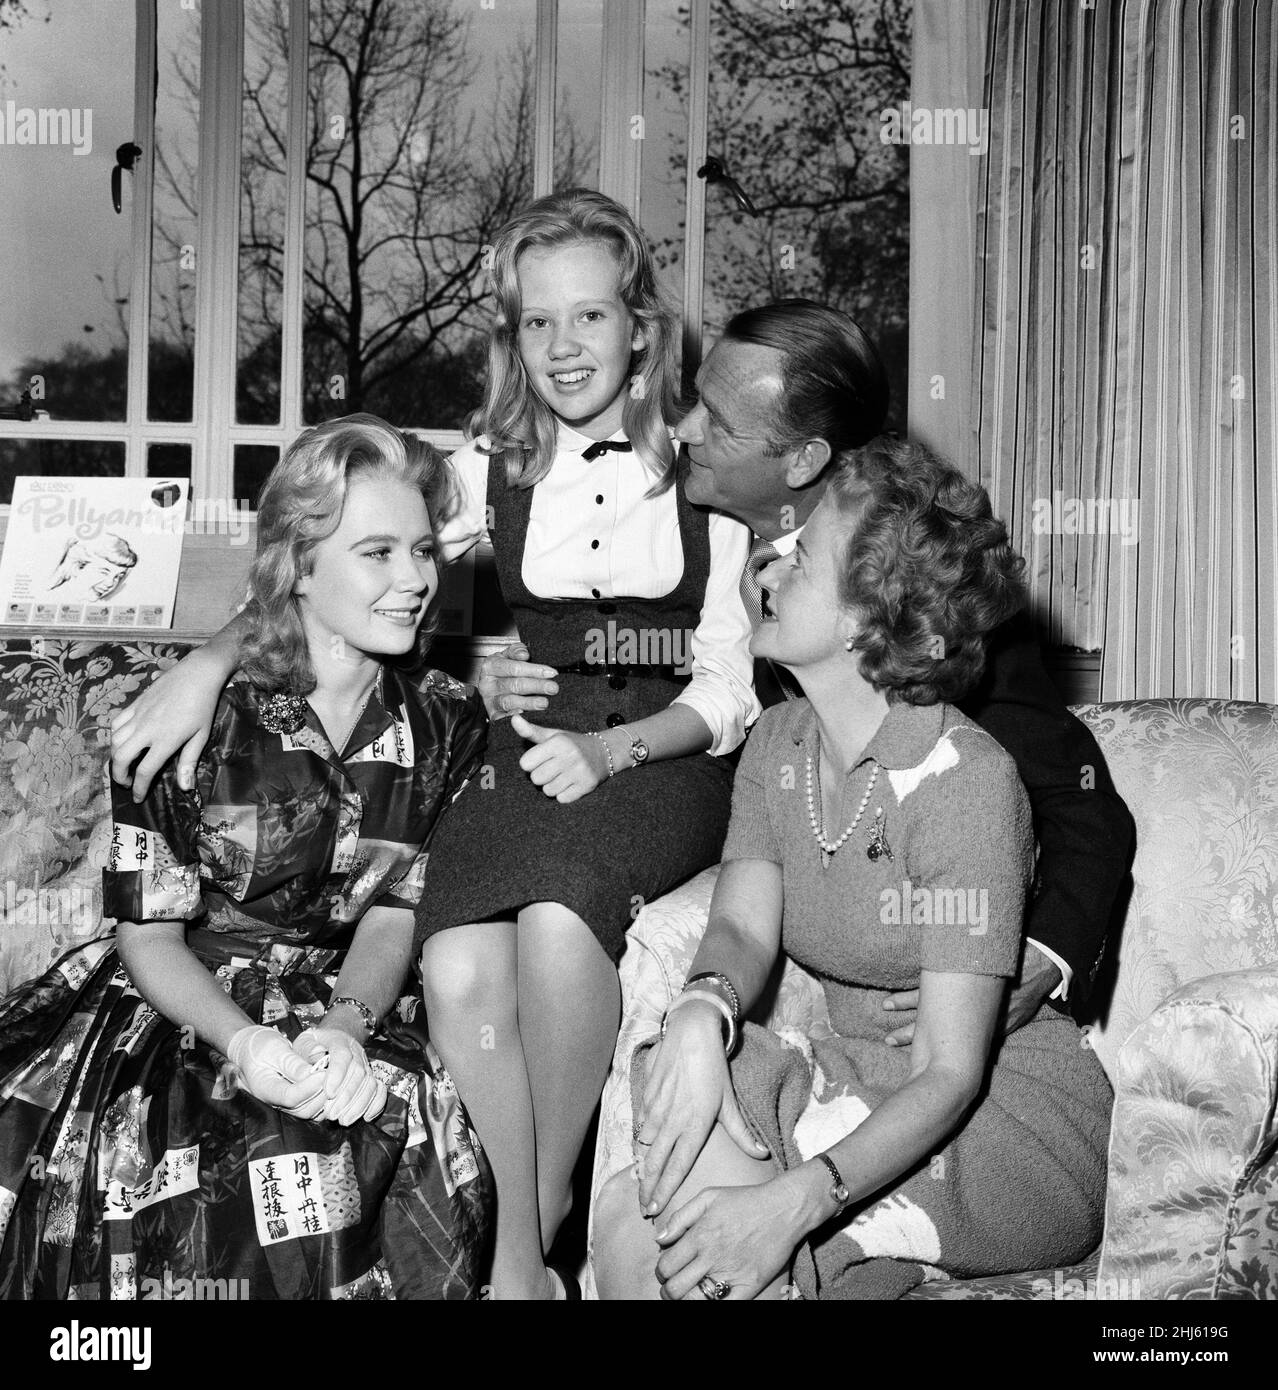 Britain's premier show business family, The Mills, have returned to London after four months in America. They are pictured at a press reception at the Dorchester. Hayley Mills  (2nd left) with her sister Juliet Mills (left) and parents John Mills and Mary Hayley Bell at the press reception. 1st November 1960. Stock Photo